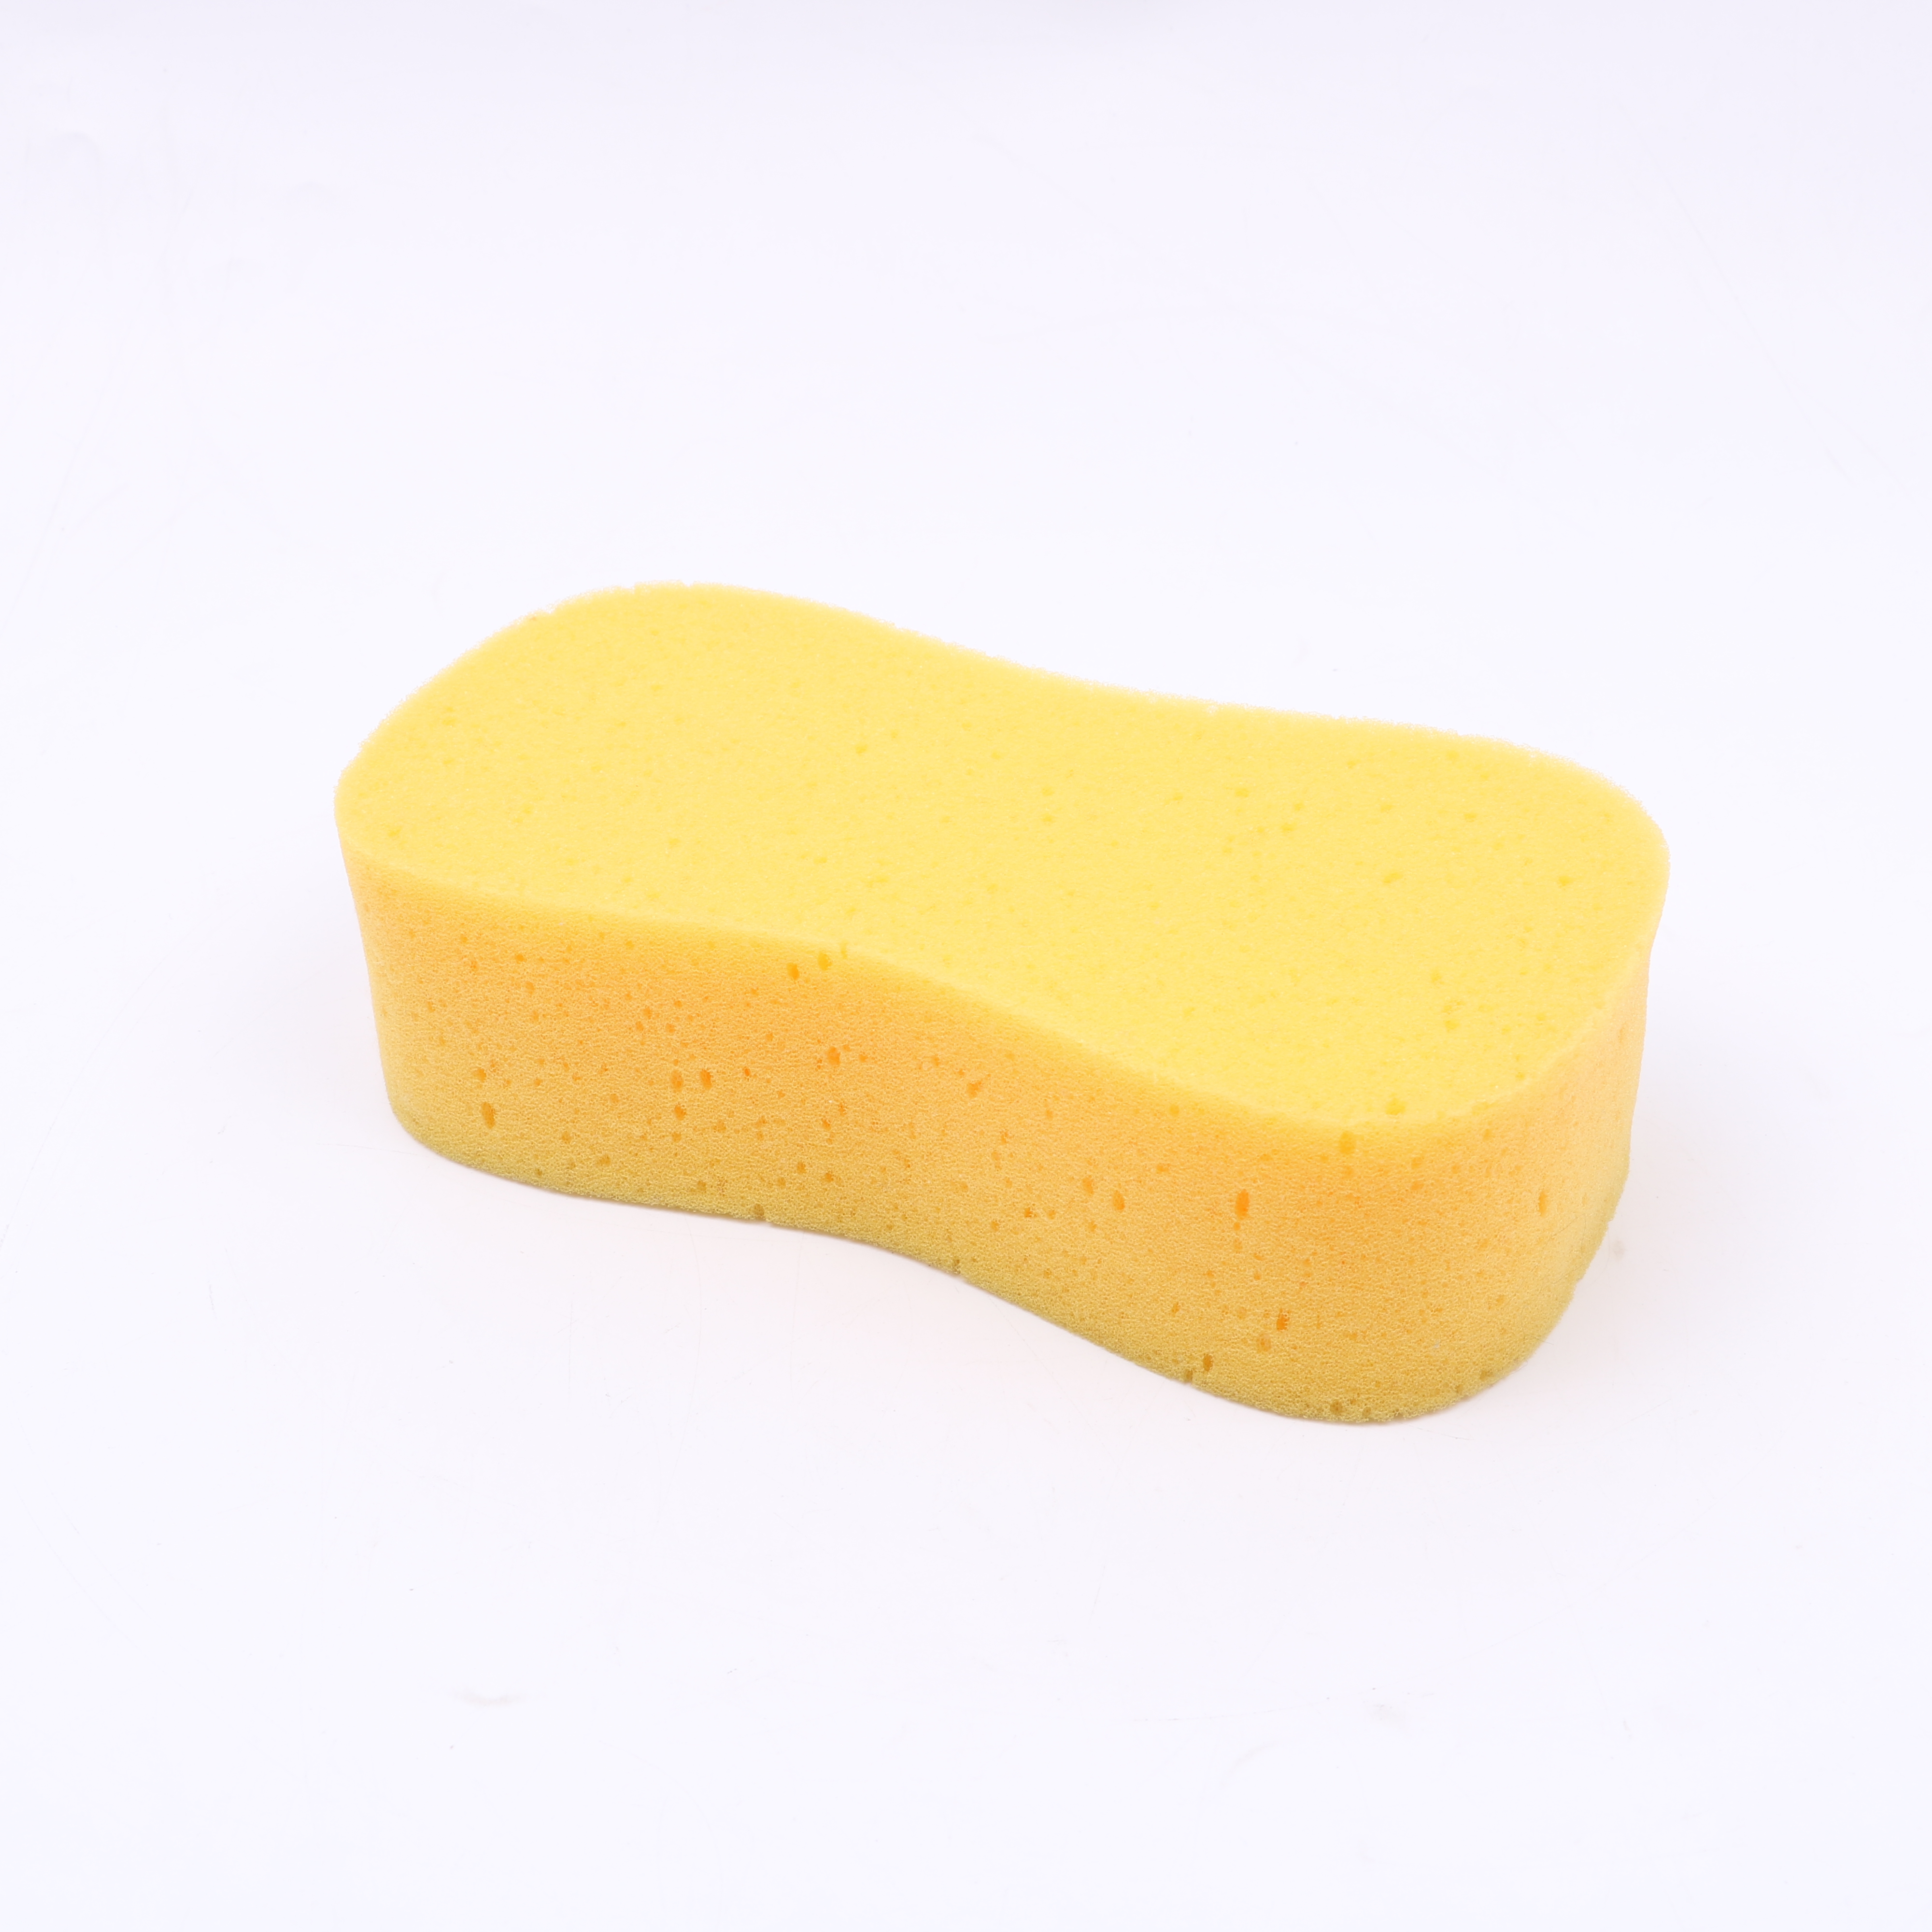 High Quality for Sponge Spa Car Wash -  2020 Factory Sale Car Care Tools Quality Inspection for Yellow Car Coating Sponge Pad – Eastsun